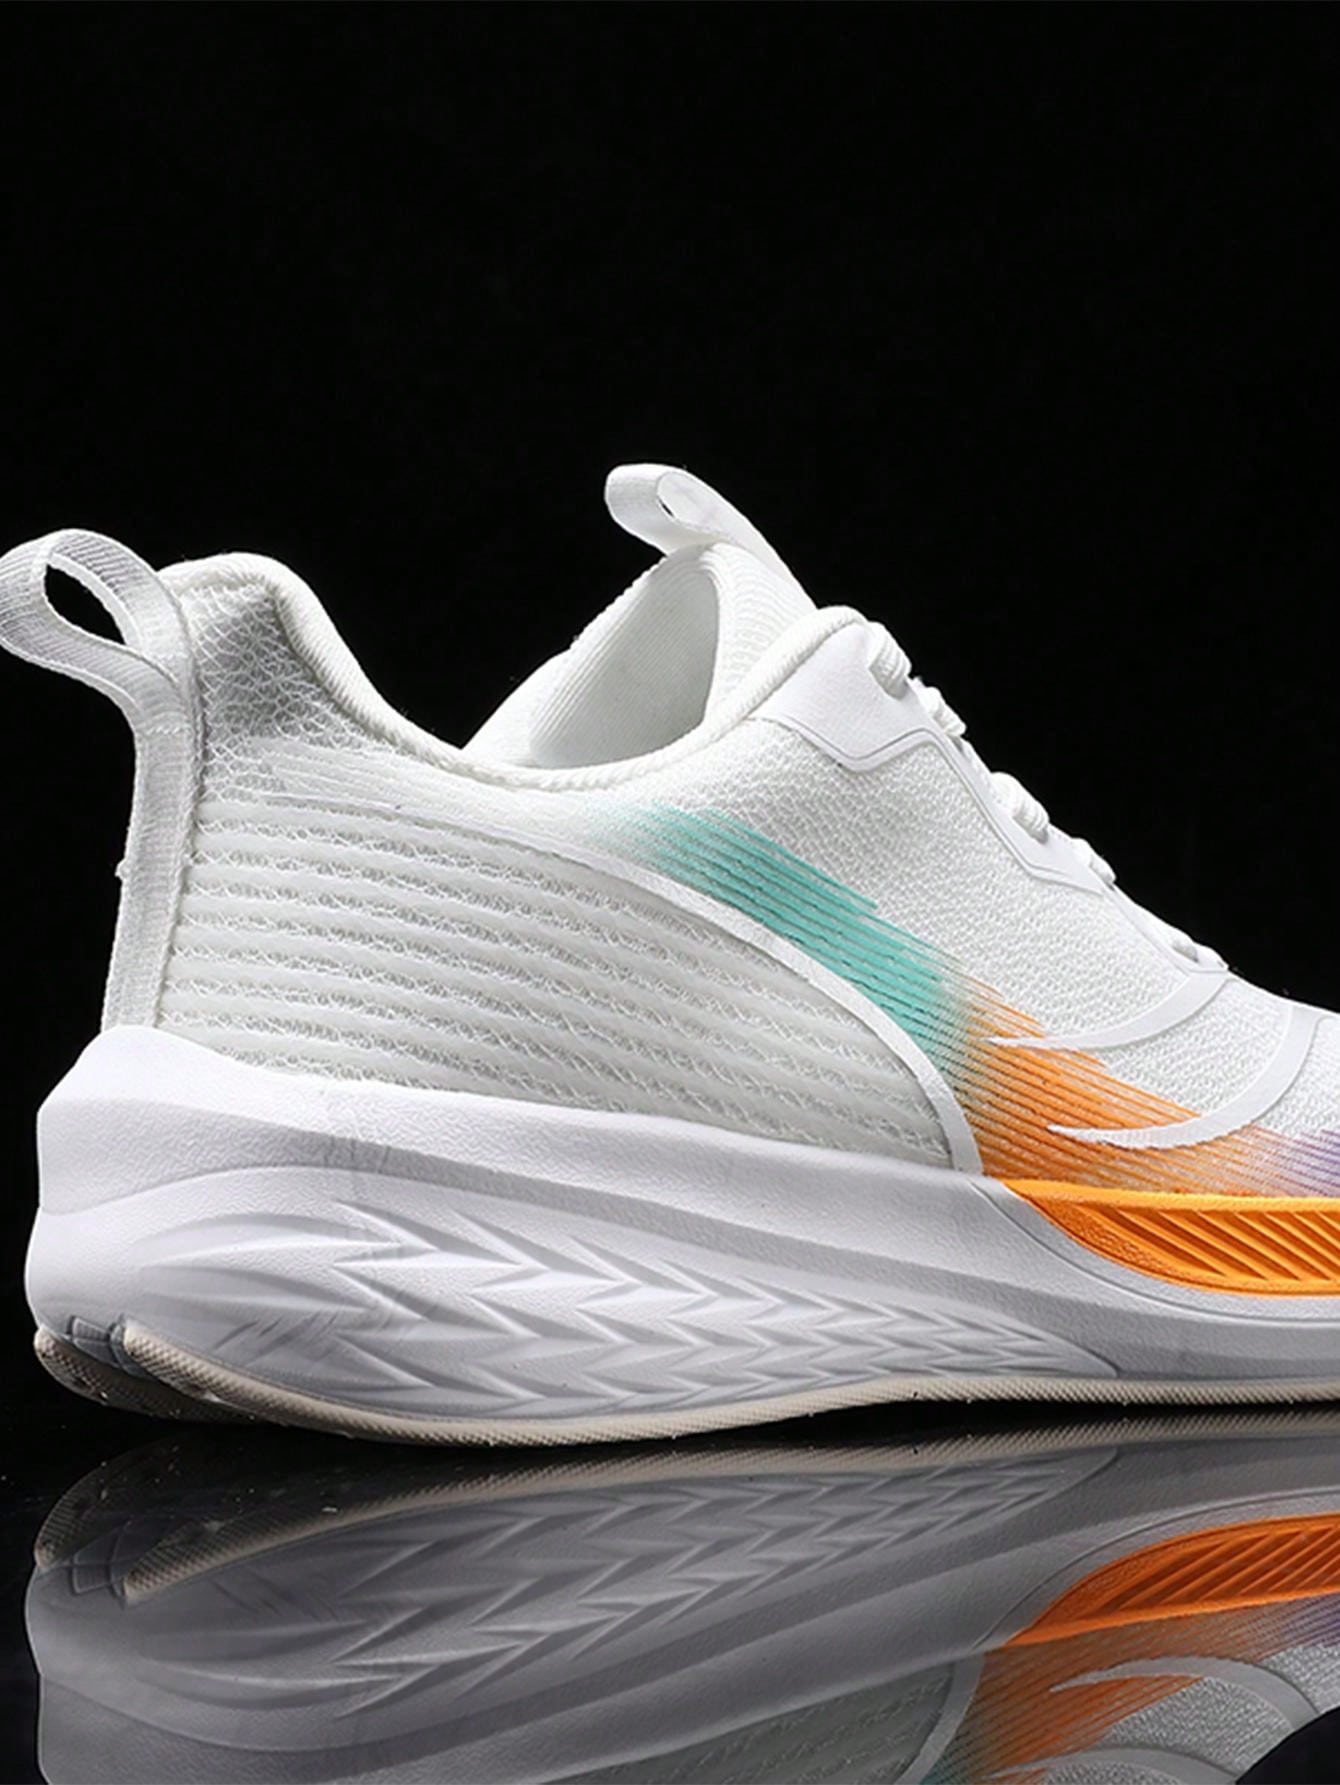 1pair Breathable Fashionable Sports Basketball Shoes For Couples Or Students, With Color Block Design, Front Lace-Up Closure And Anti-Skid Sole